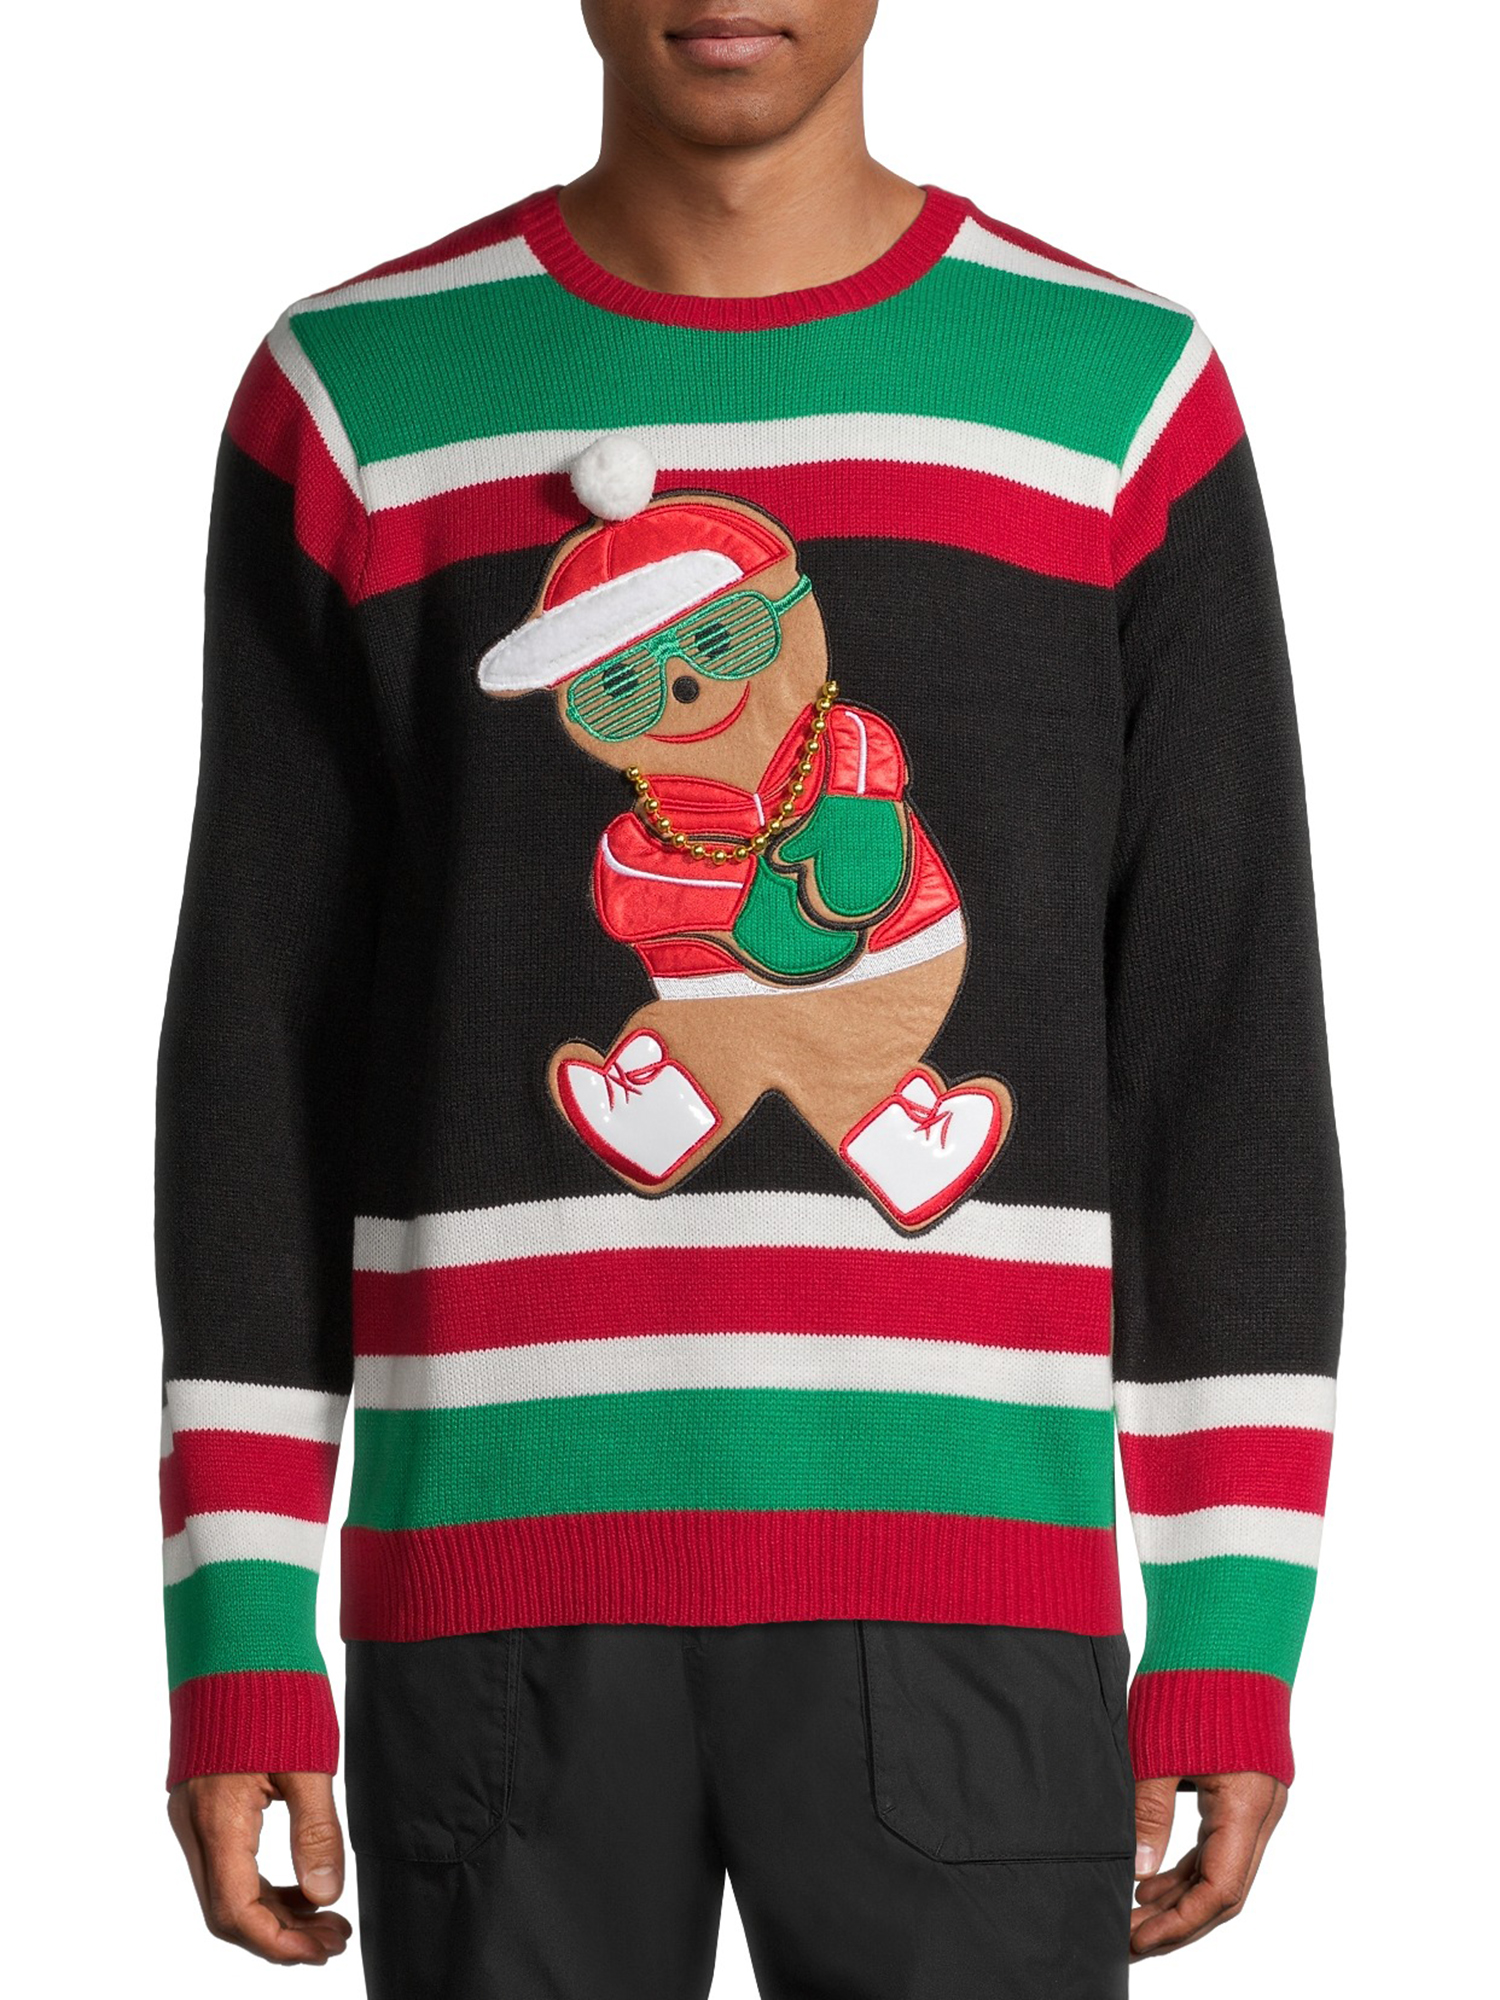 Holiday Time Men's and Big Men's Ugly Christmas Sweater - image 1 of 6